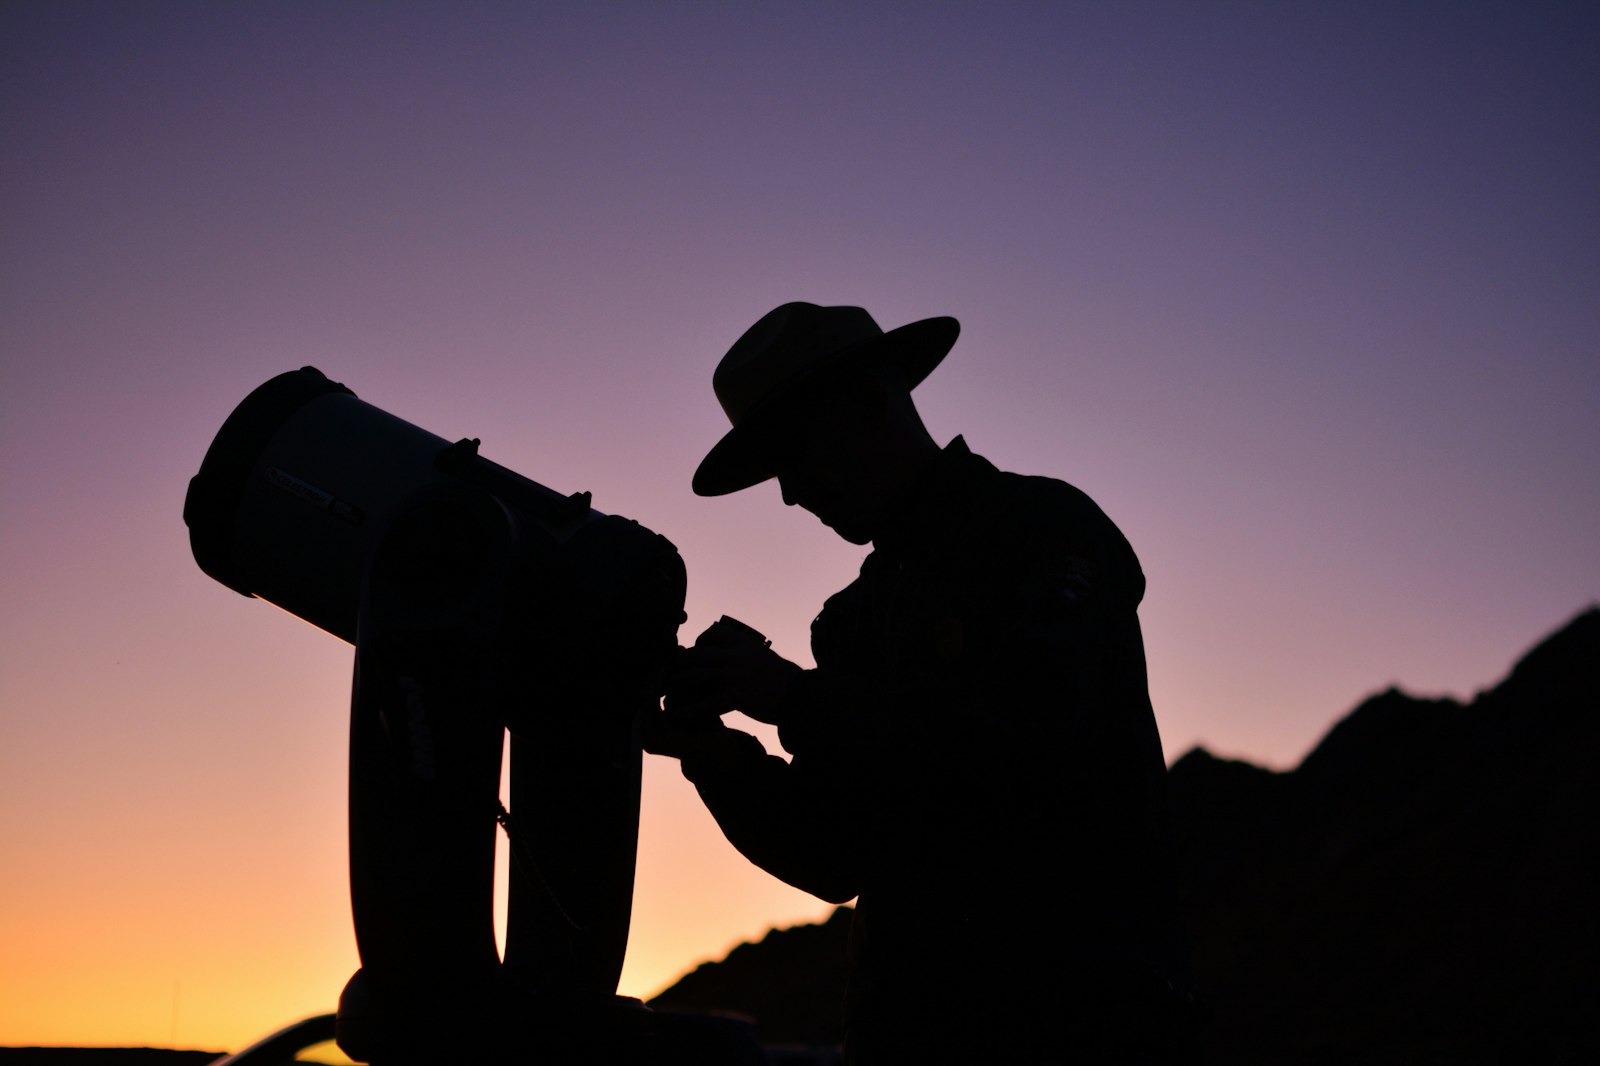 Against a sunset, a ranger in uniform tends to a telescope